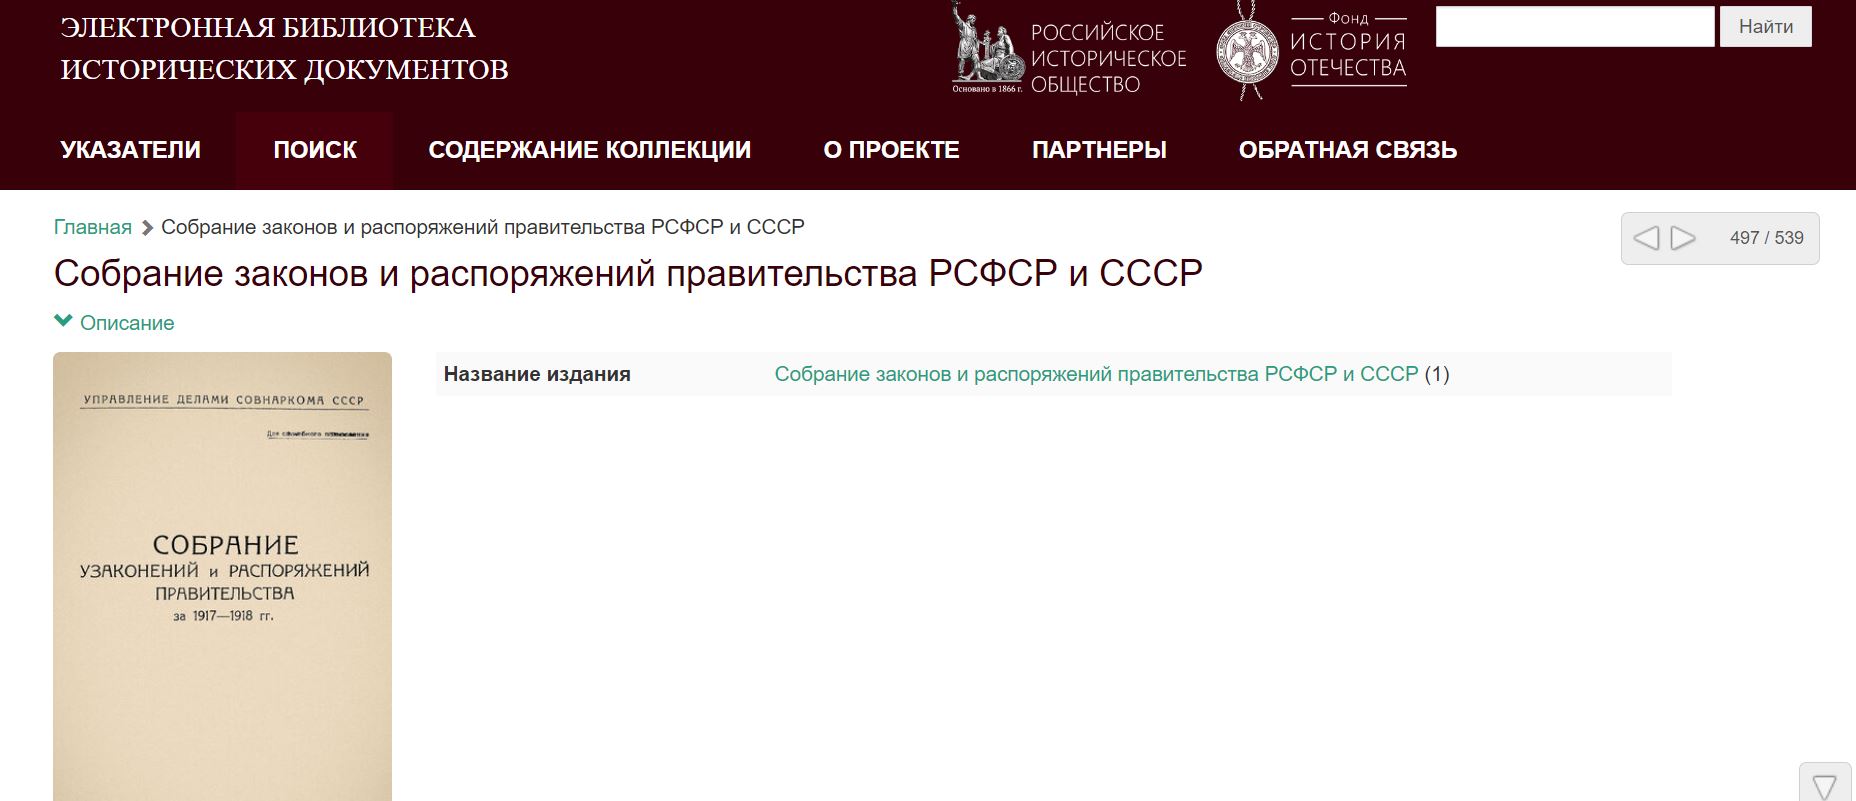 This picture shows the landing page of the compendium of laws of the Soviet Union for 1918.